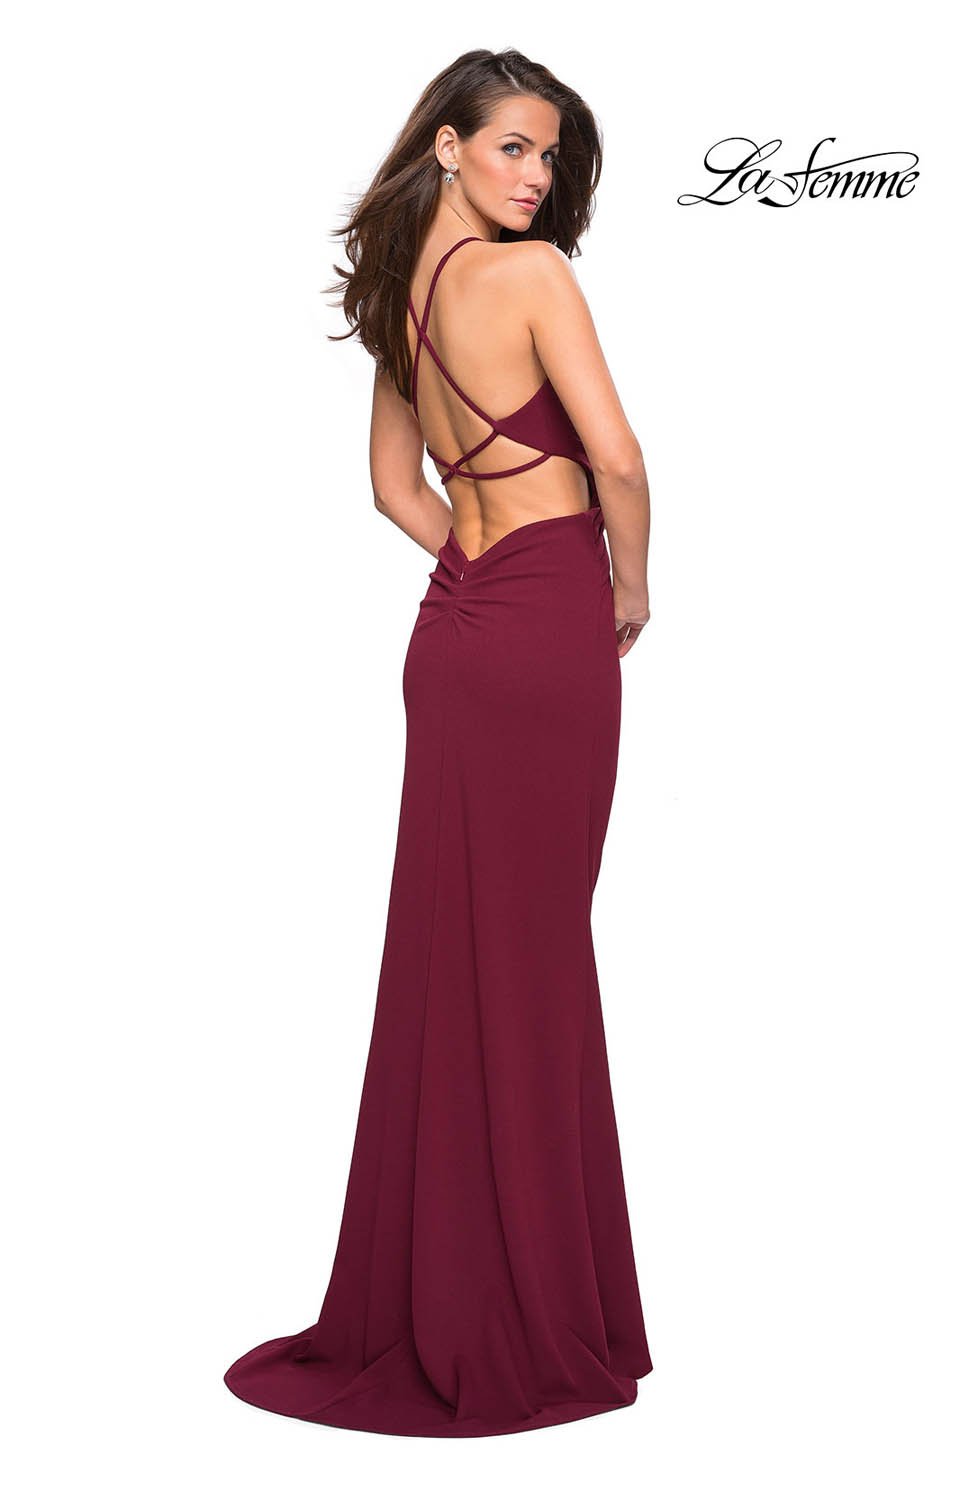 La Femme 27070 dress images in these colors: Black, Burgundy, White.